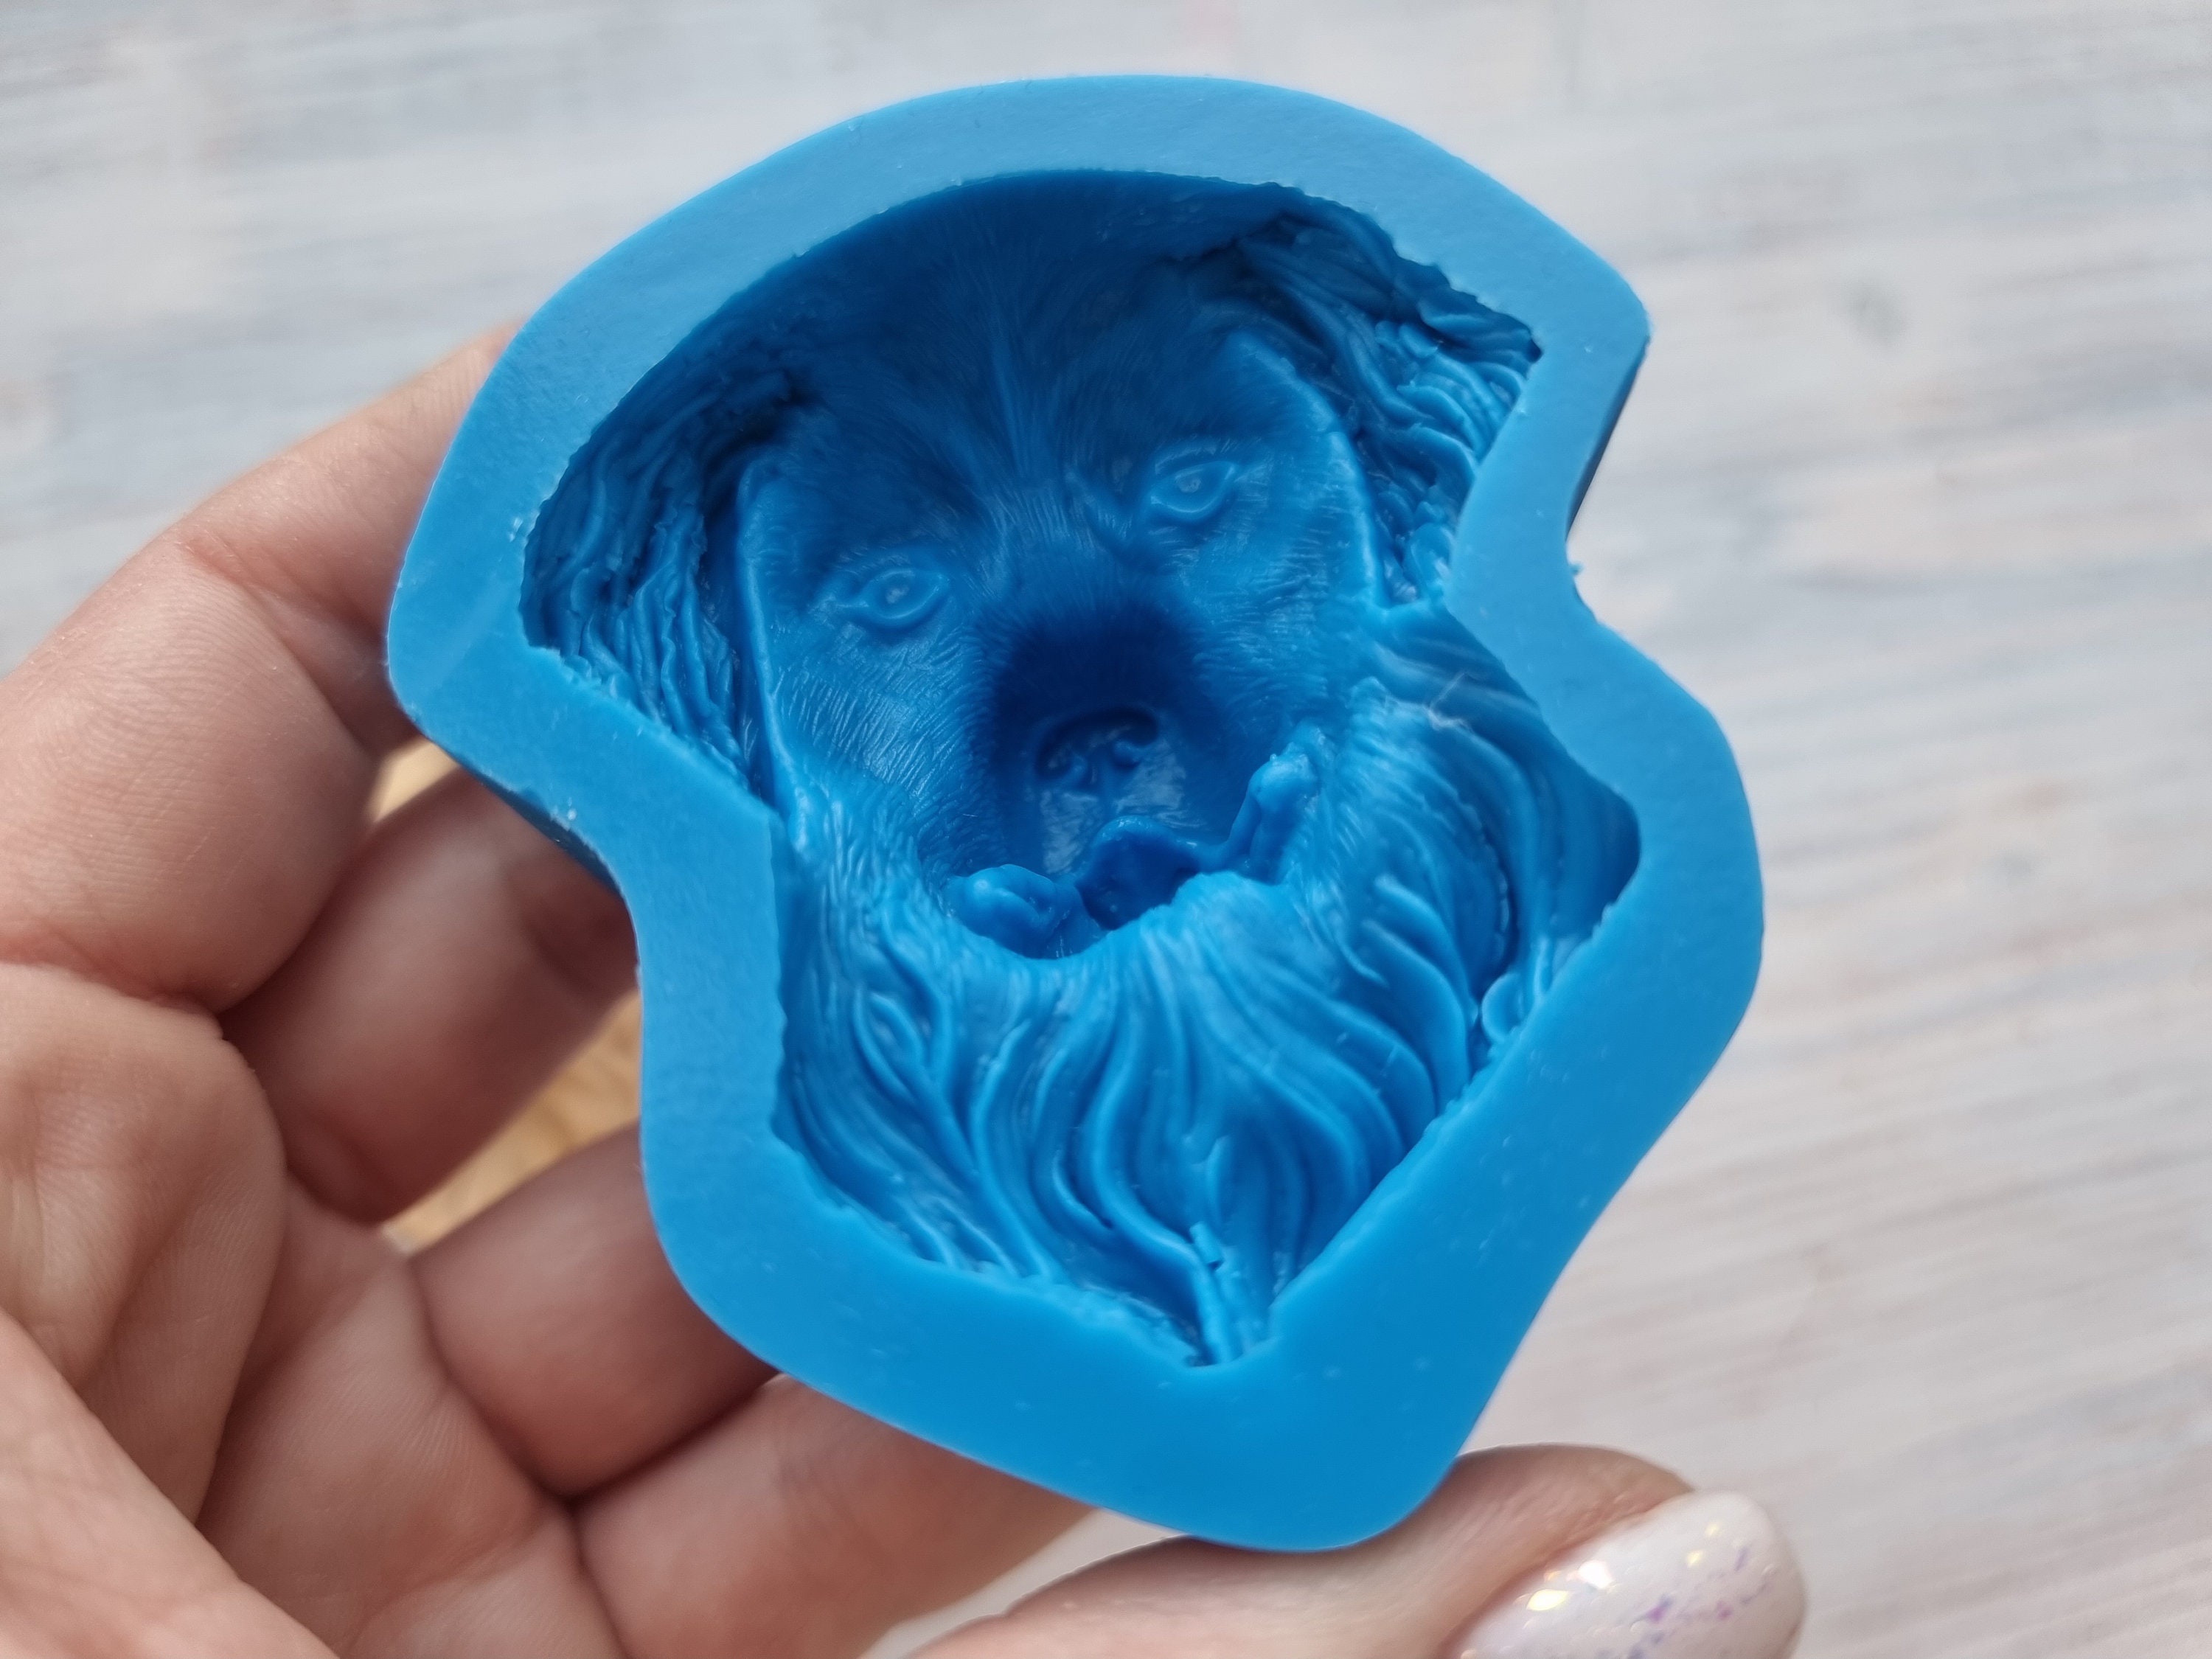 Silicone Mold of Dog, Labrador 2, 5.1 6.5 Cm, Modeling Tool for  Accessories, Jewelry, Home Decor, Shape for All Types of Polymer Clay 